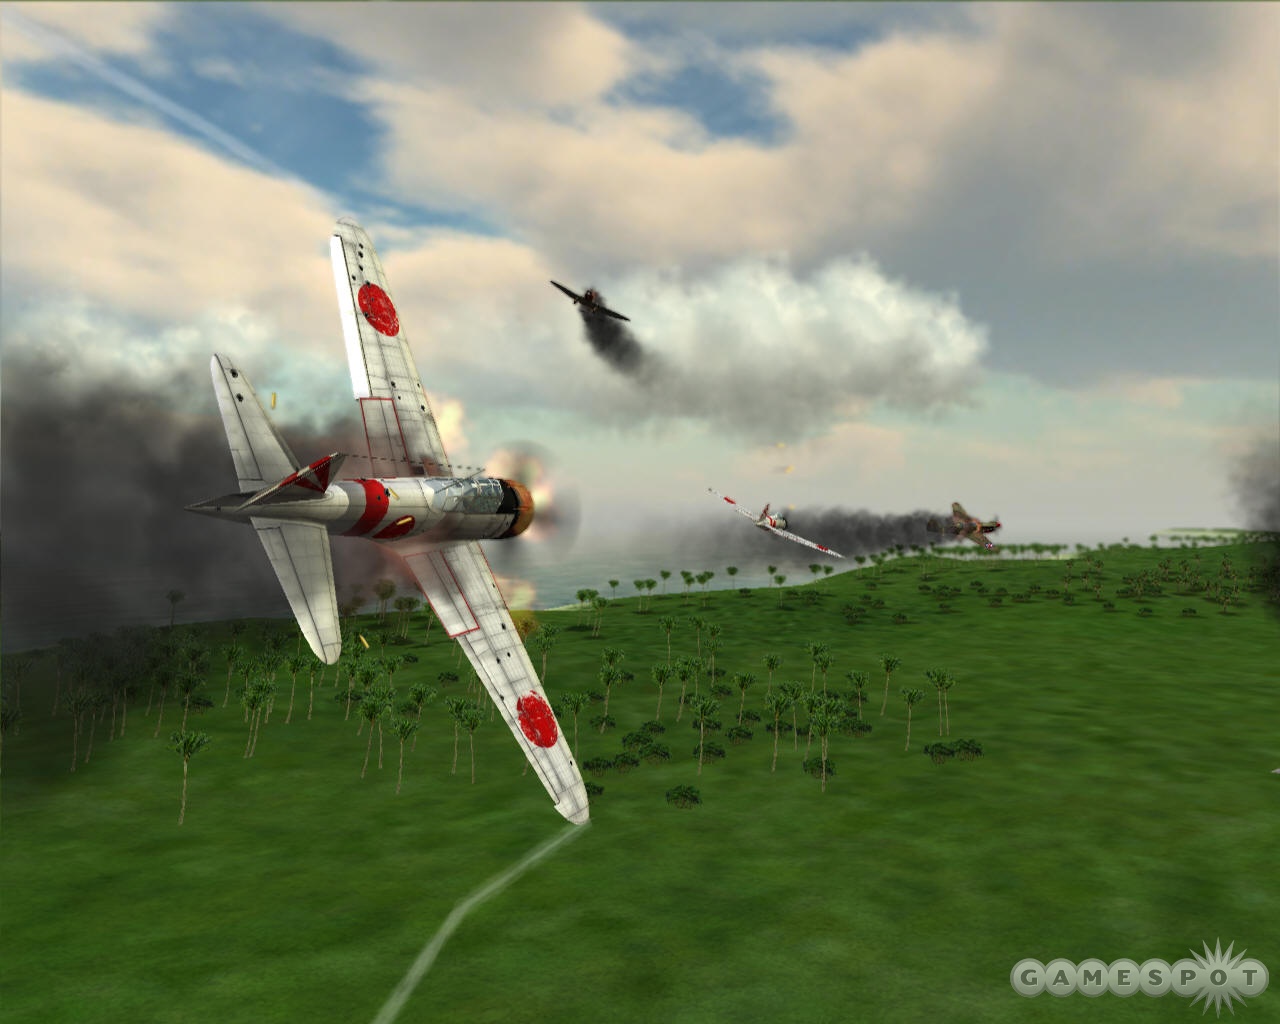 The game is packed with Hollywood-style dogfighting. Realistic physics are nowhere in sight.